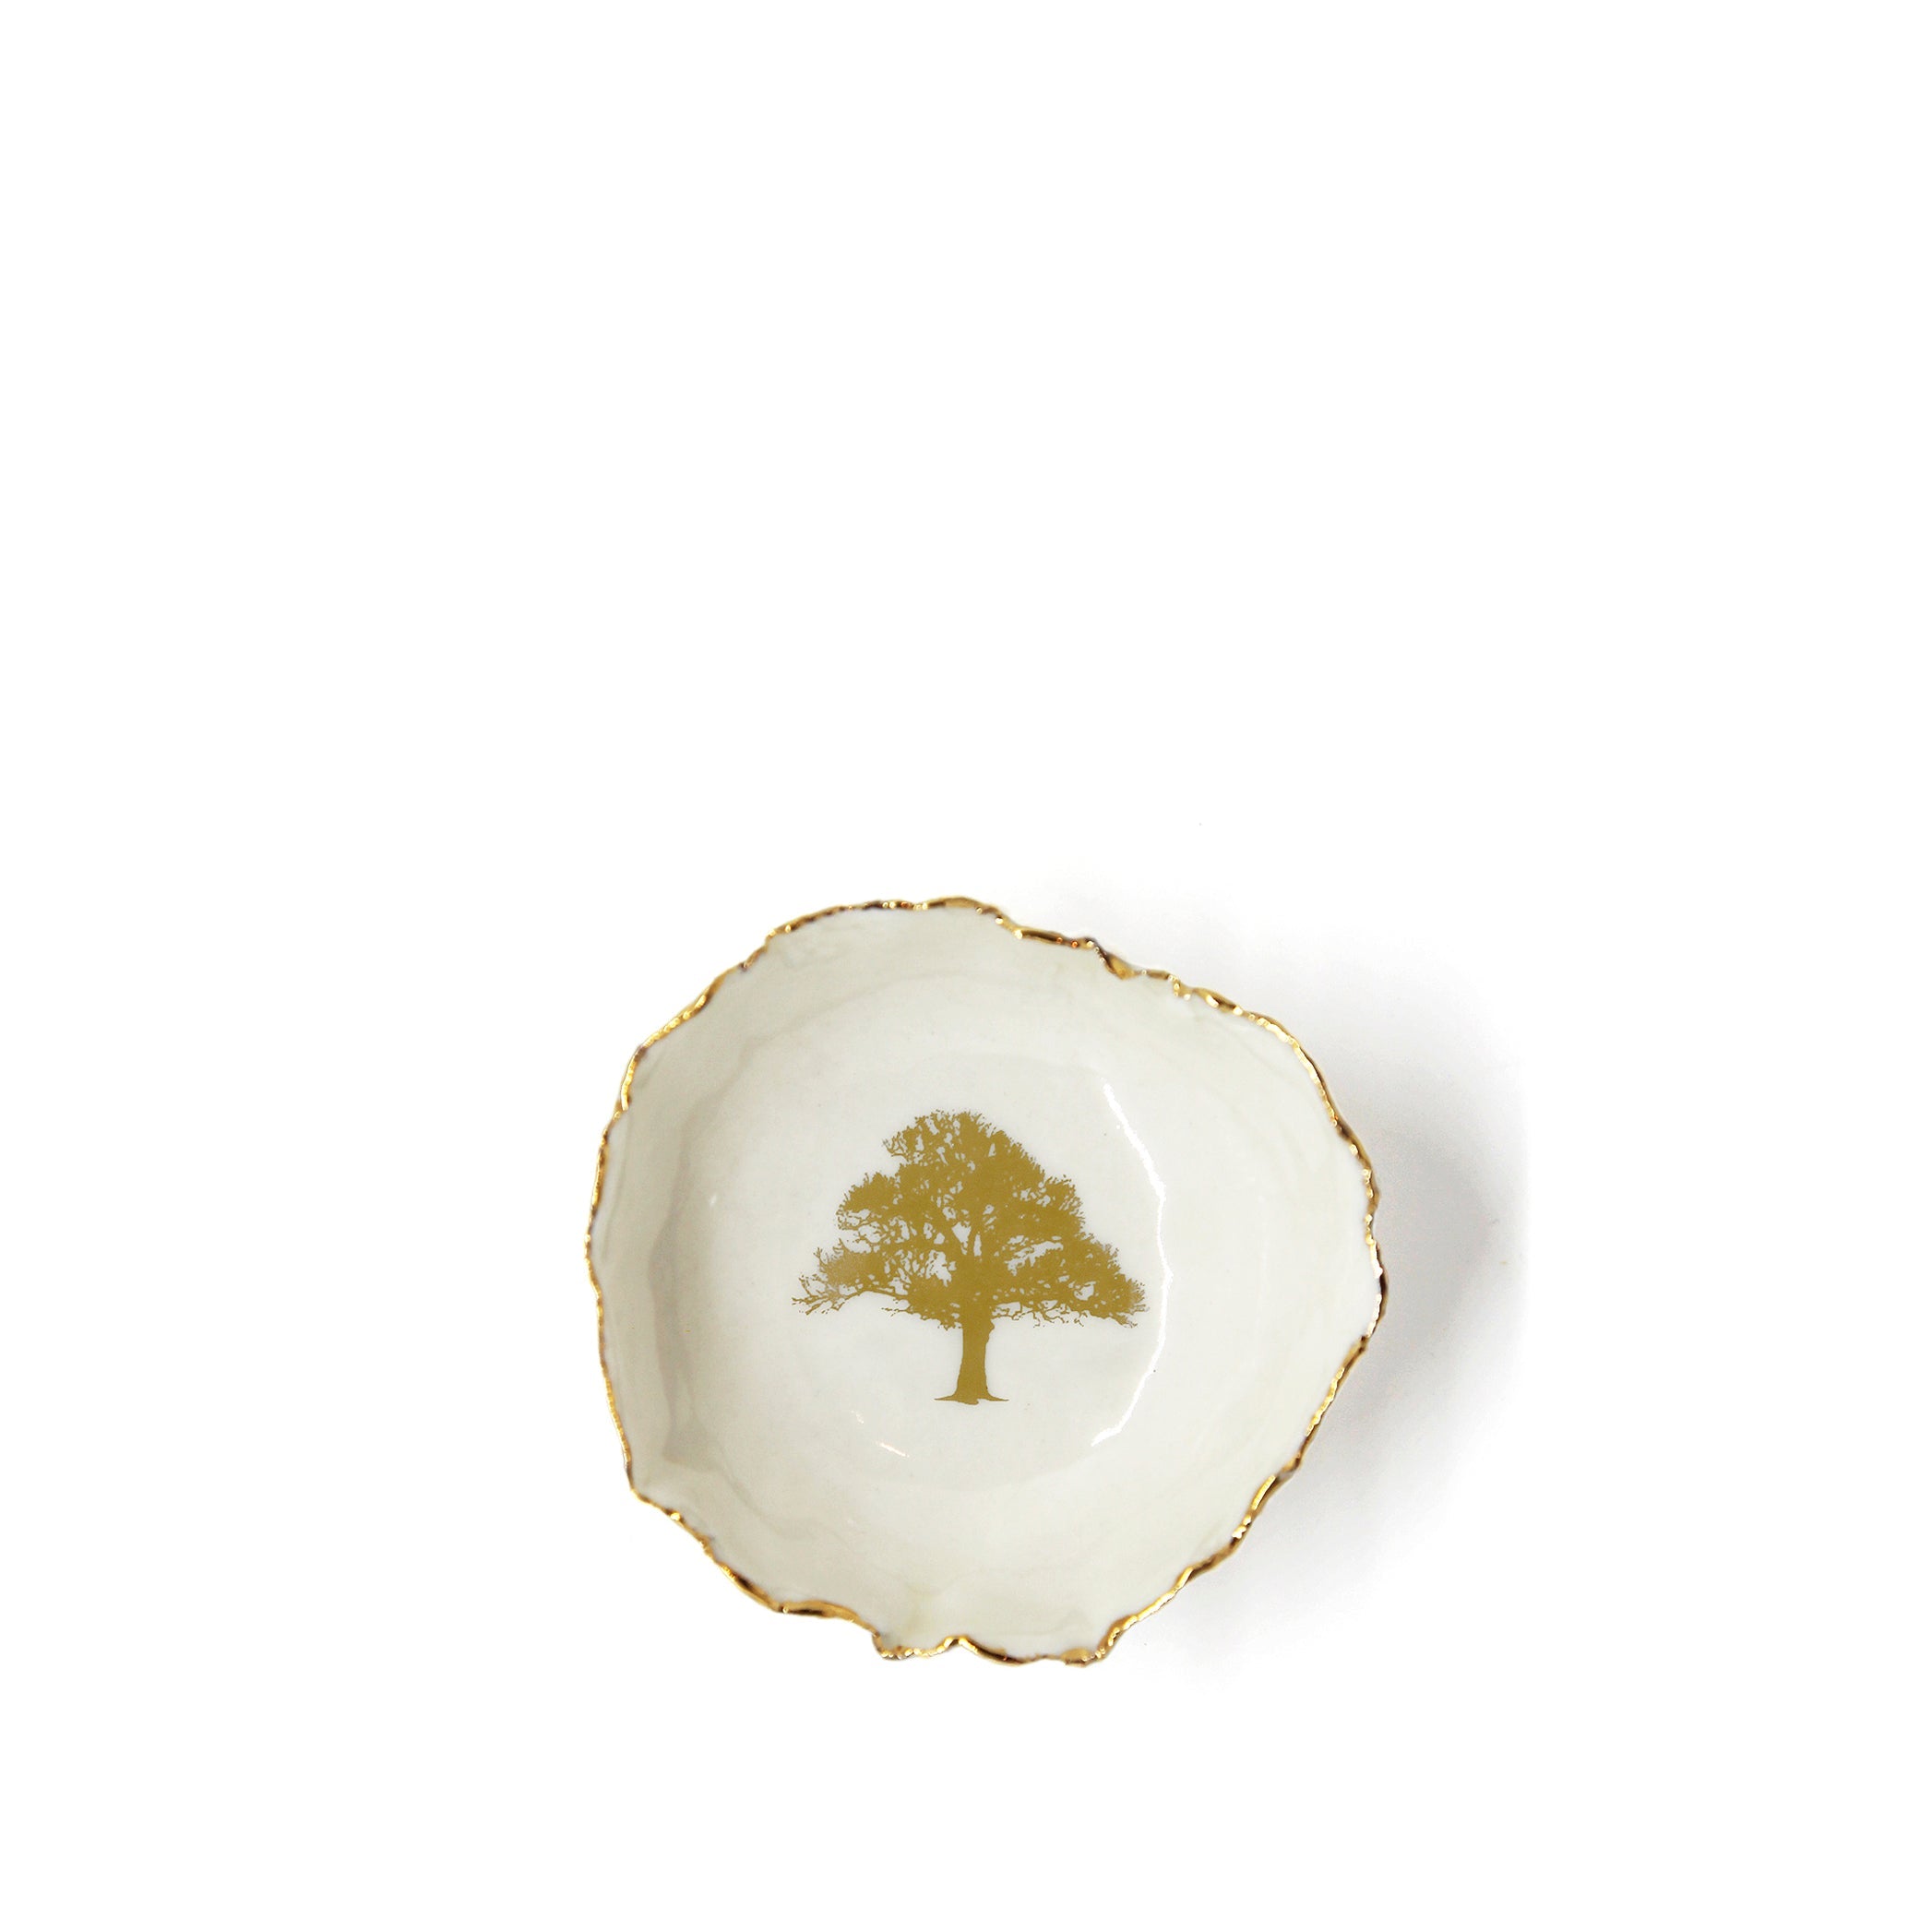 HB Jagged Bowl with Gold Tree, 7cm